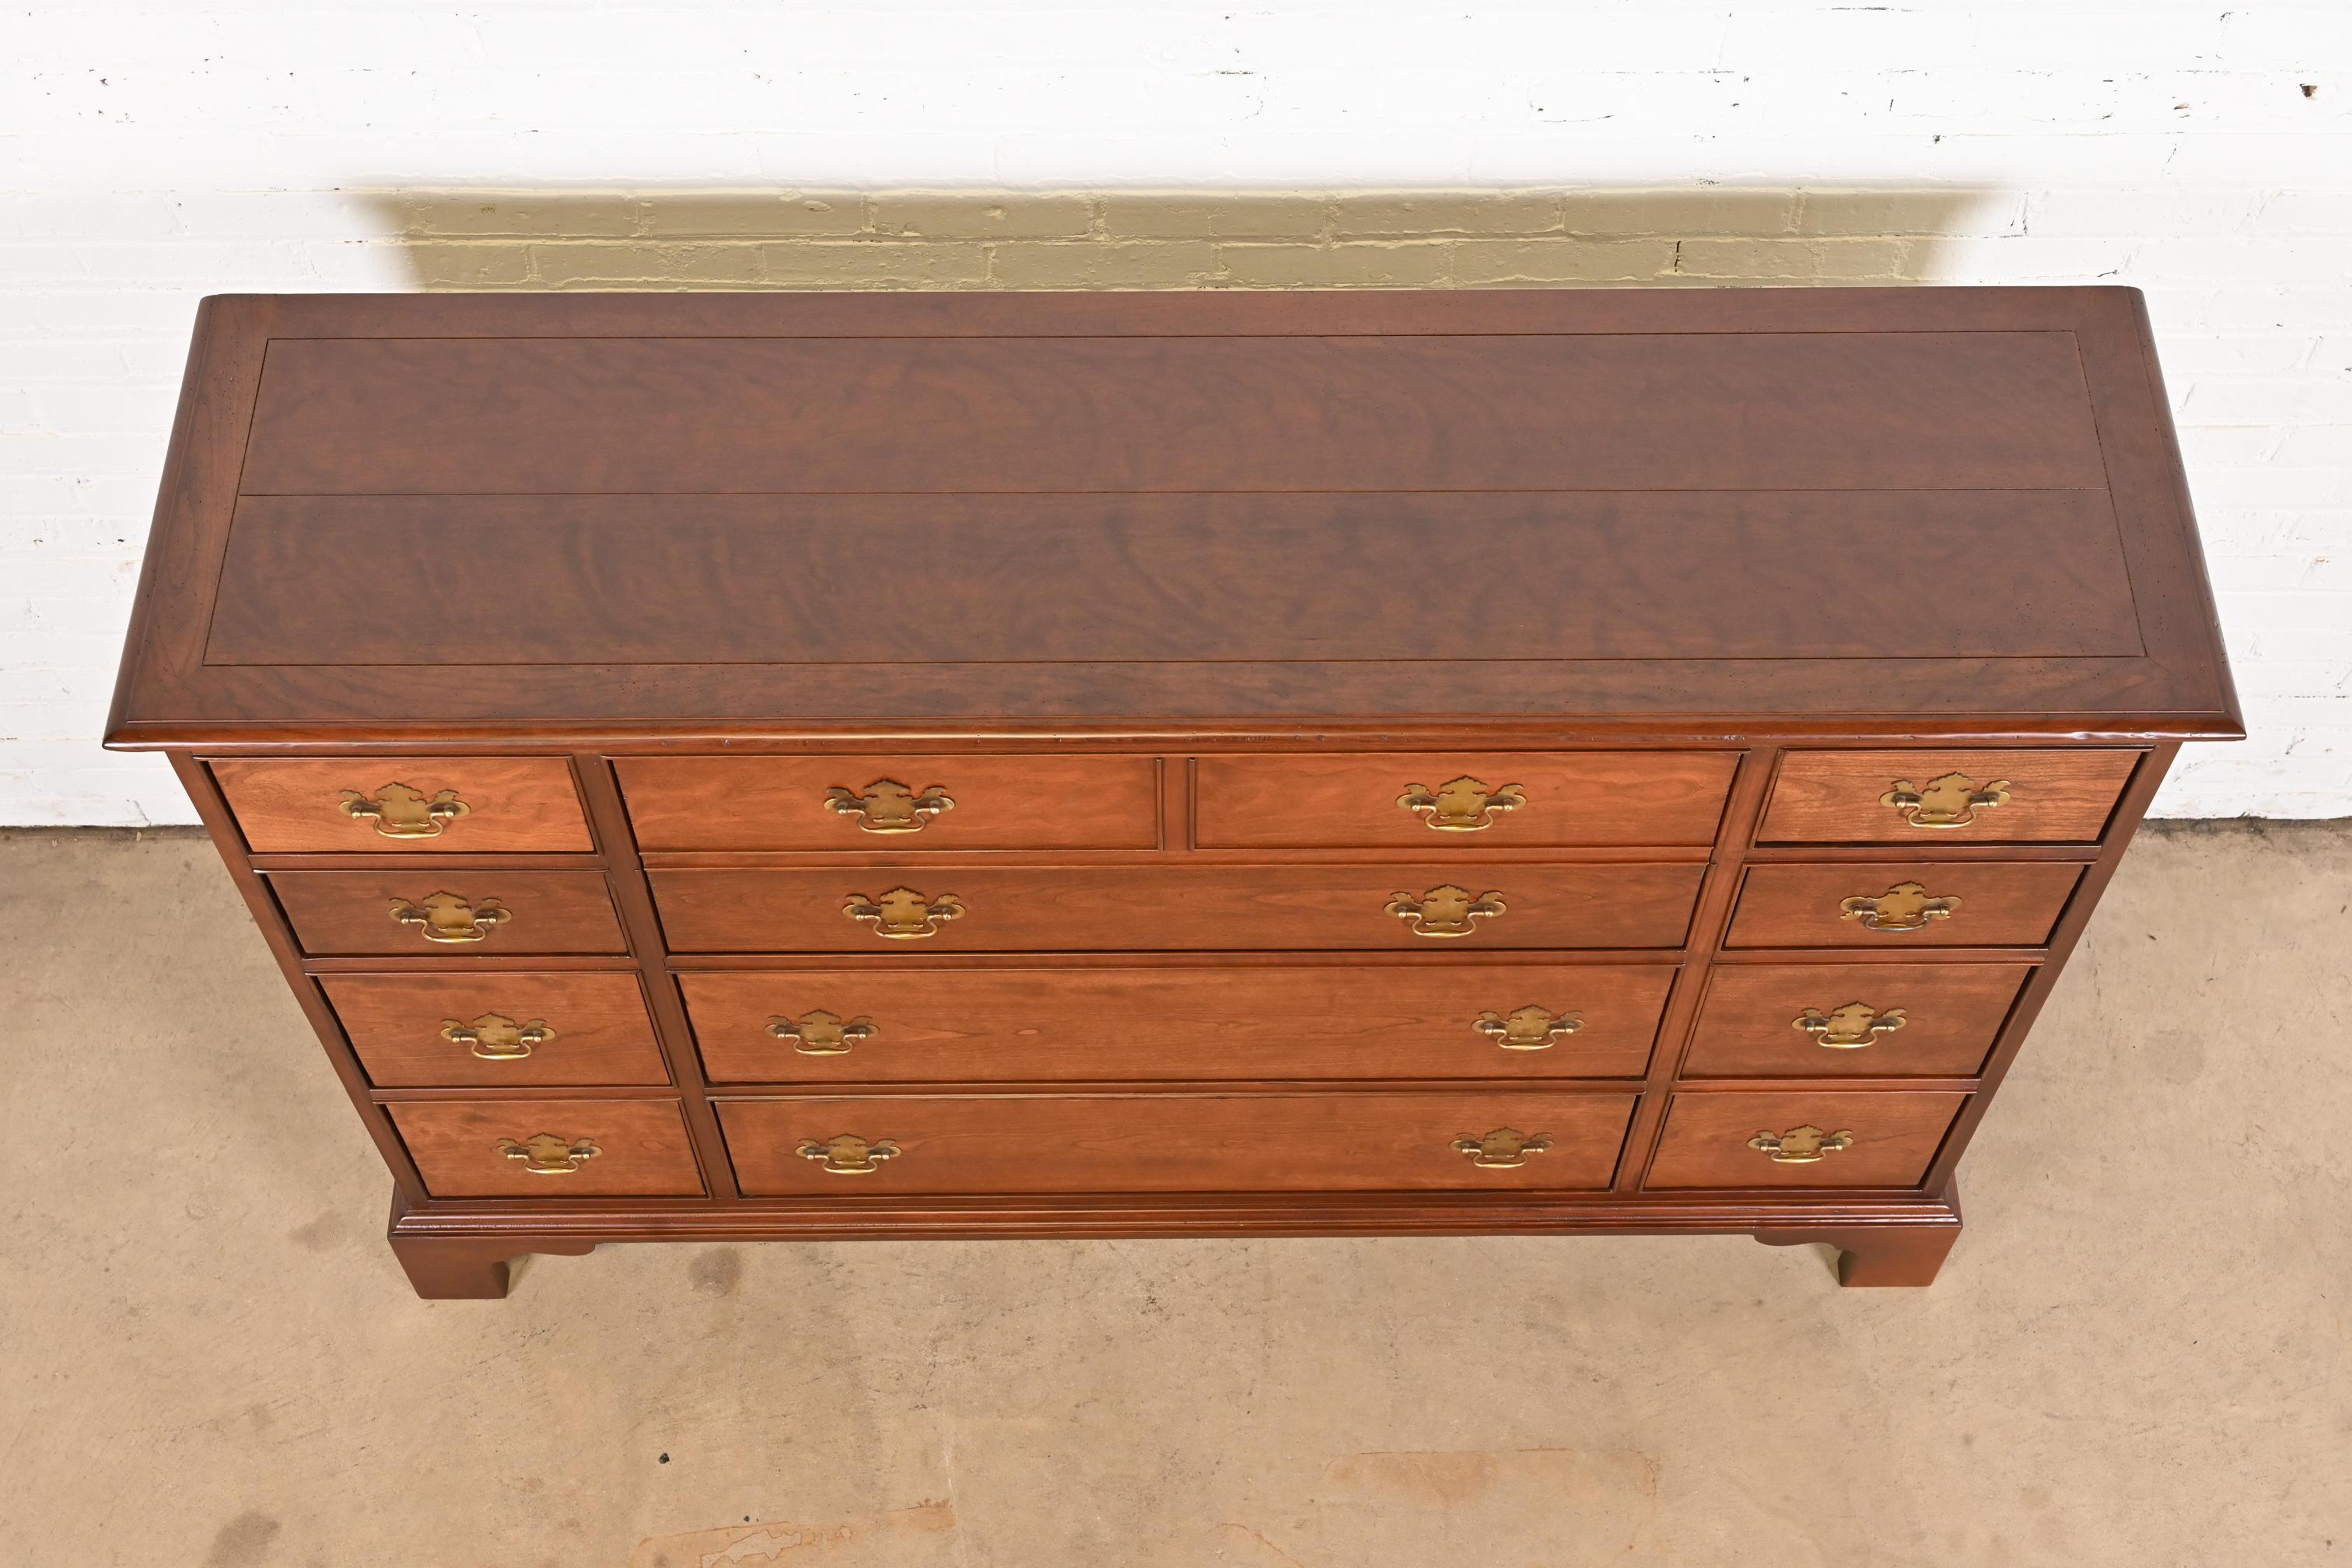 Baker Furniture Georgian Cherry Chest of Drawers with Secretary Desk, Refinished 9